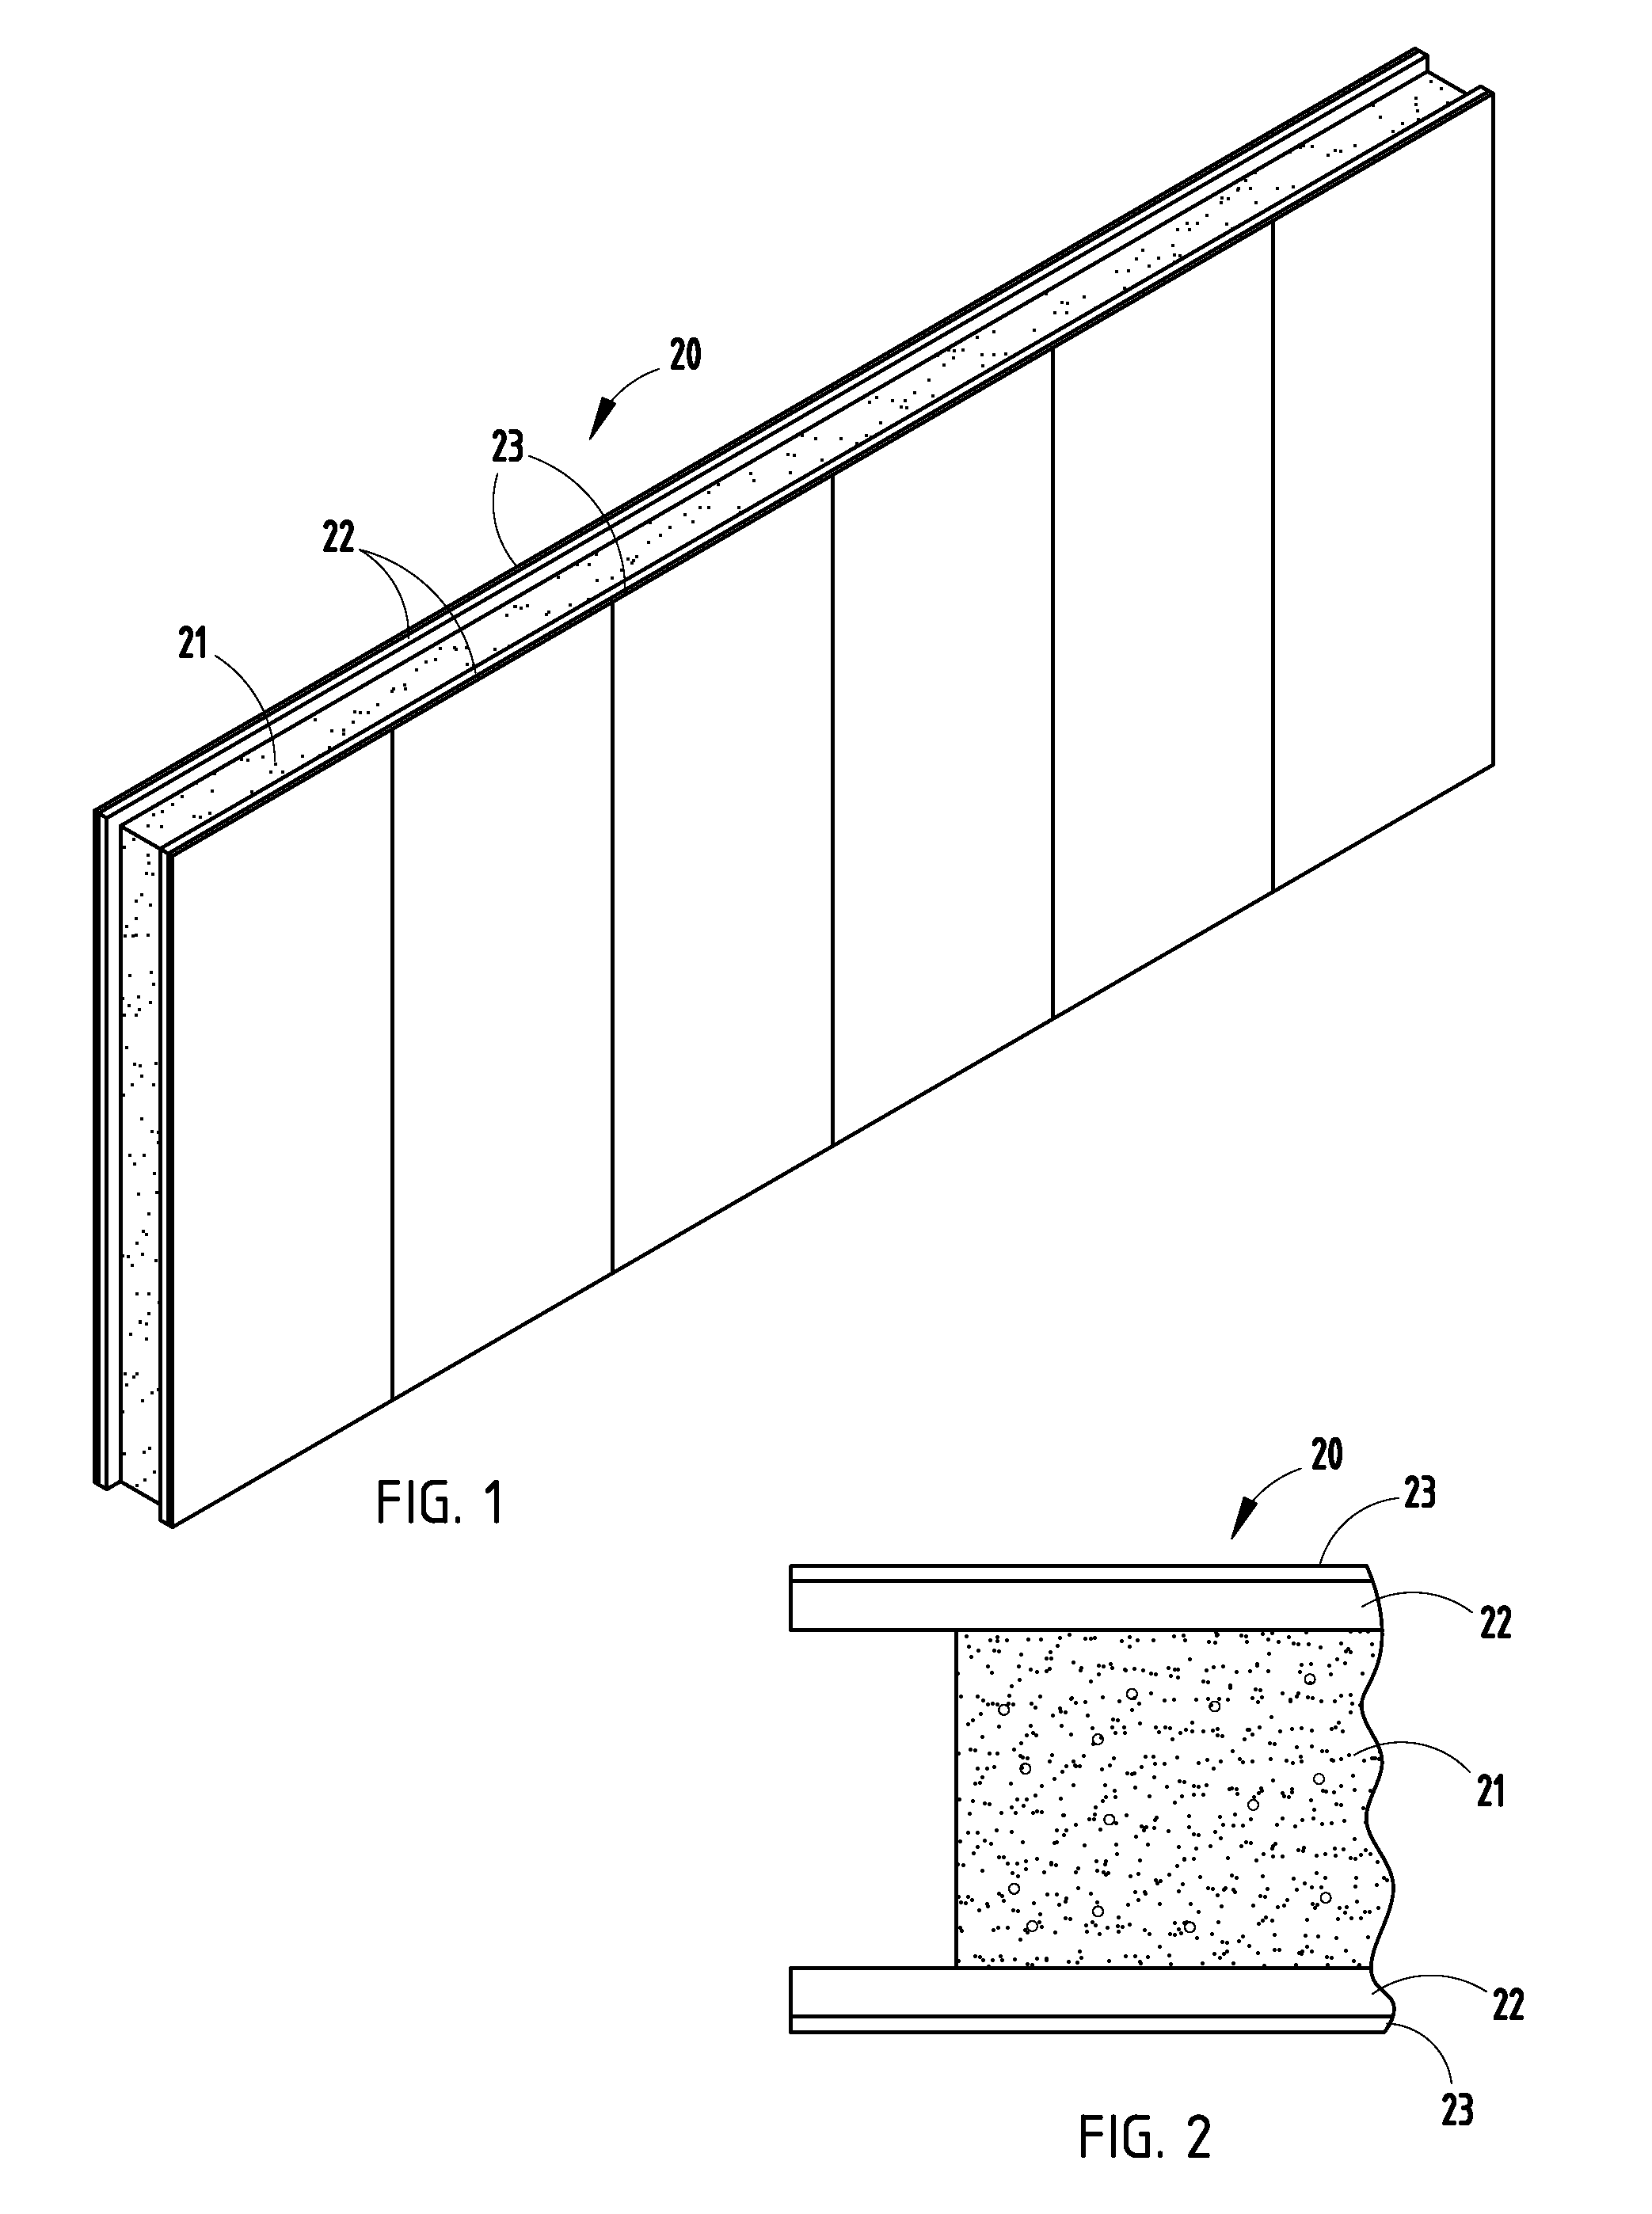 Multilayered structural insulated panel